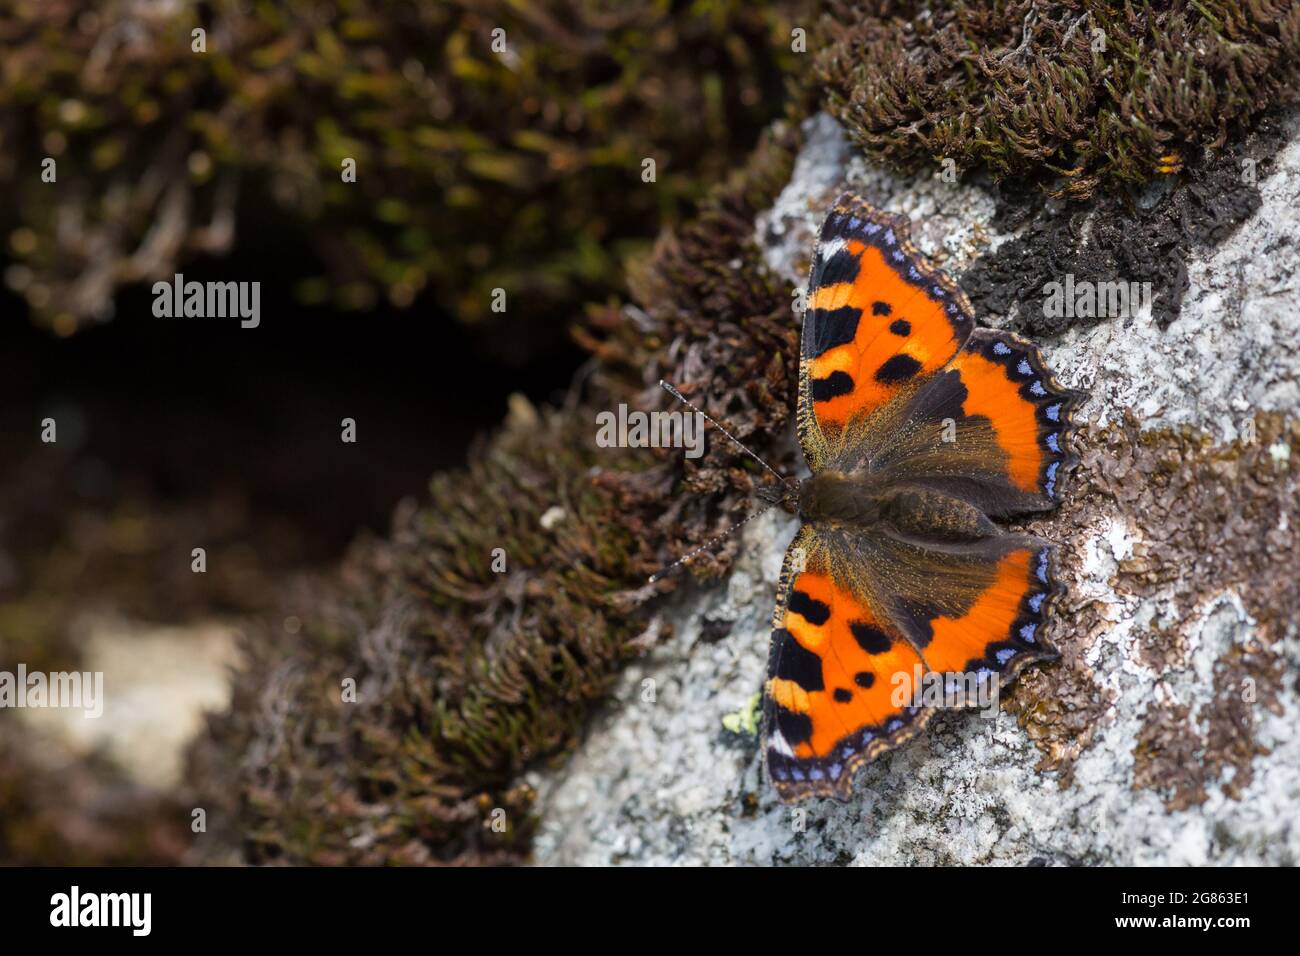 one small tortoiseshell butterfly (Aglais urticae) on stone with moss Stock Photo